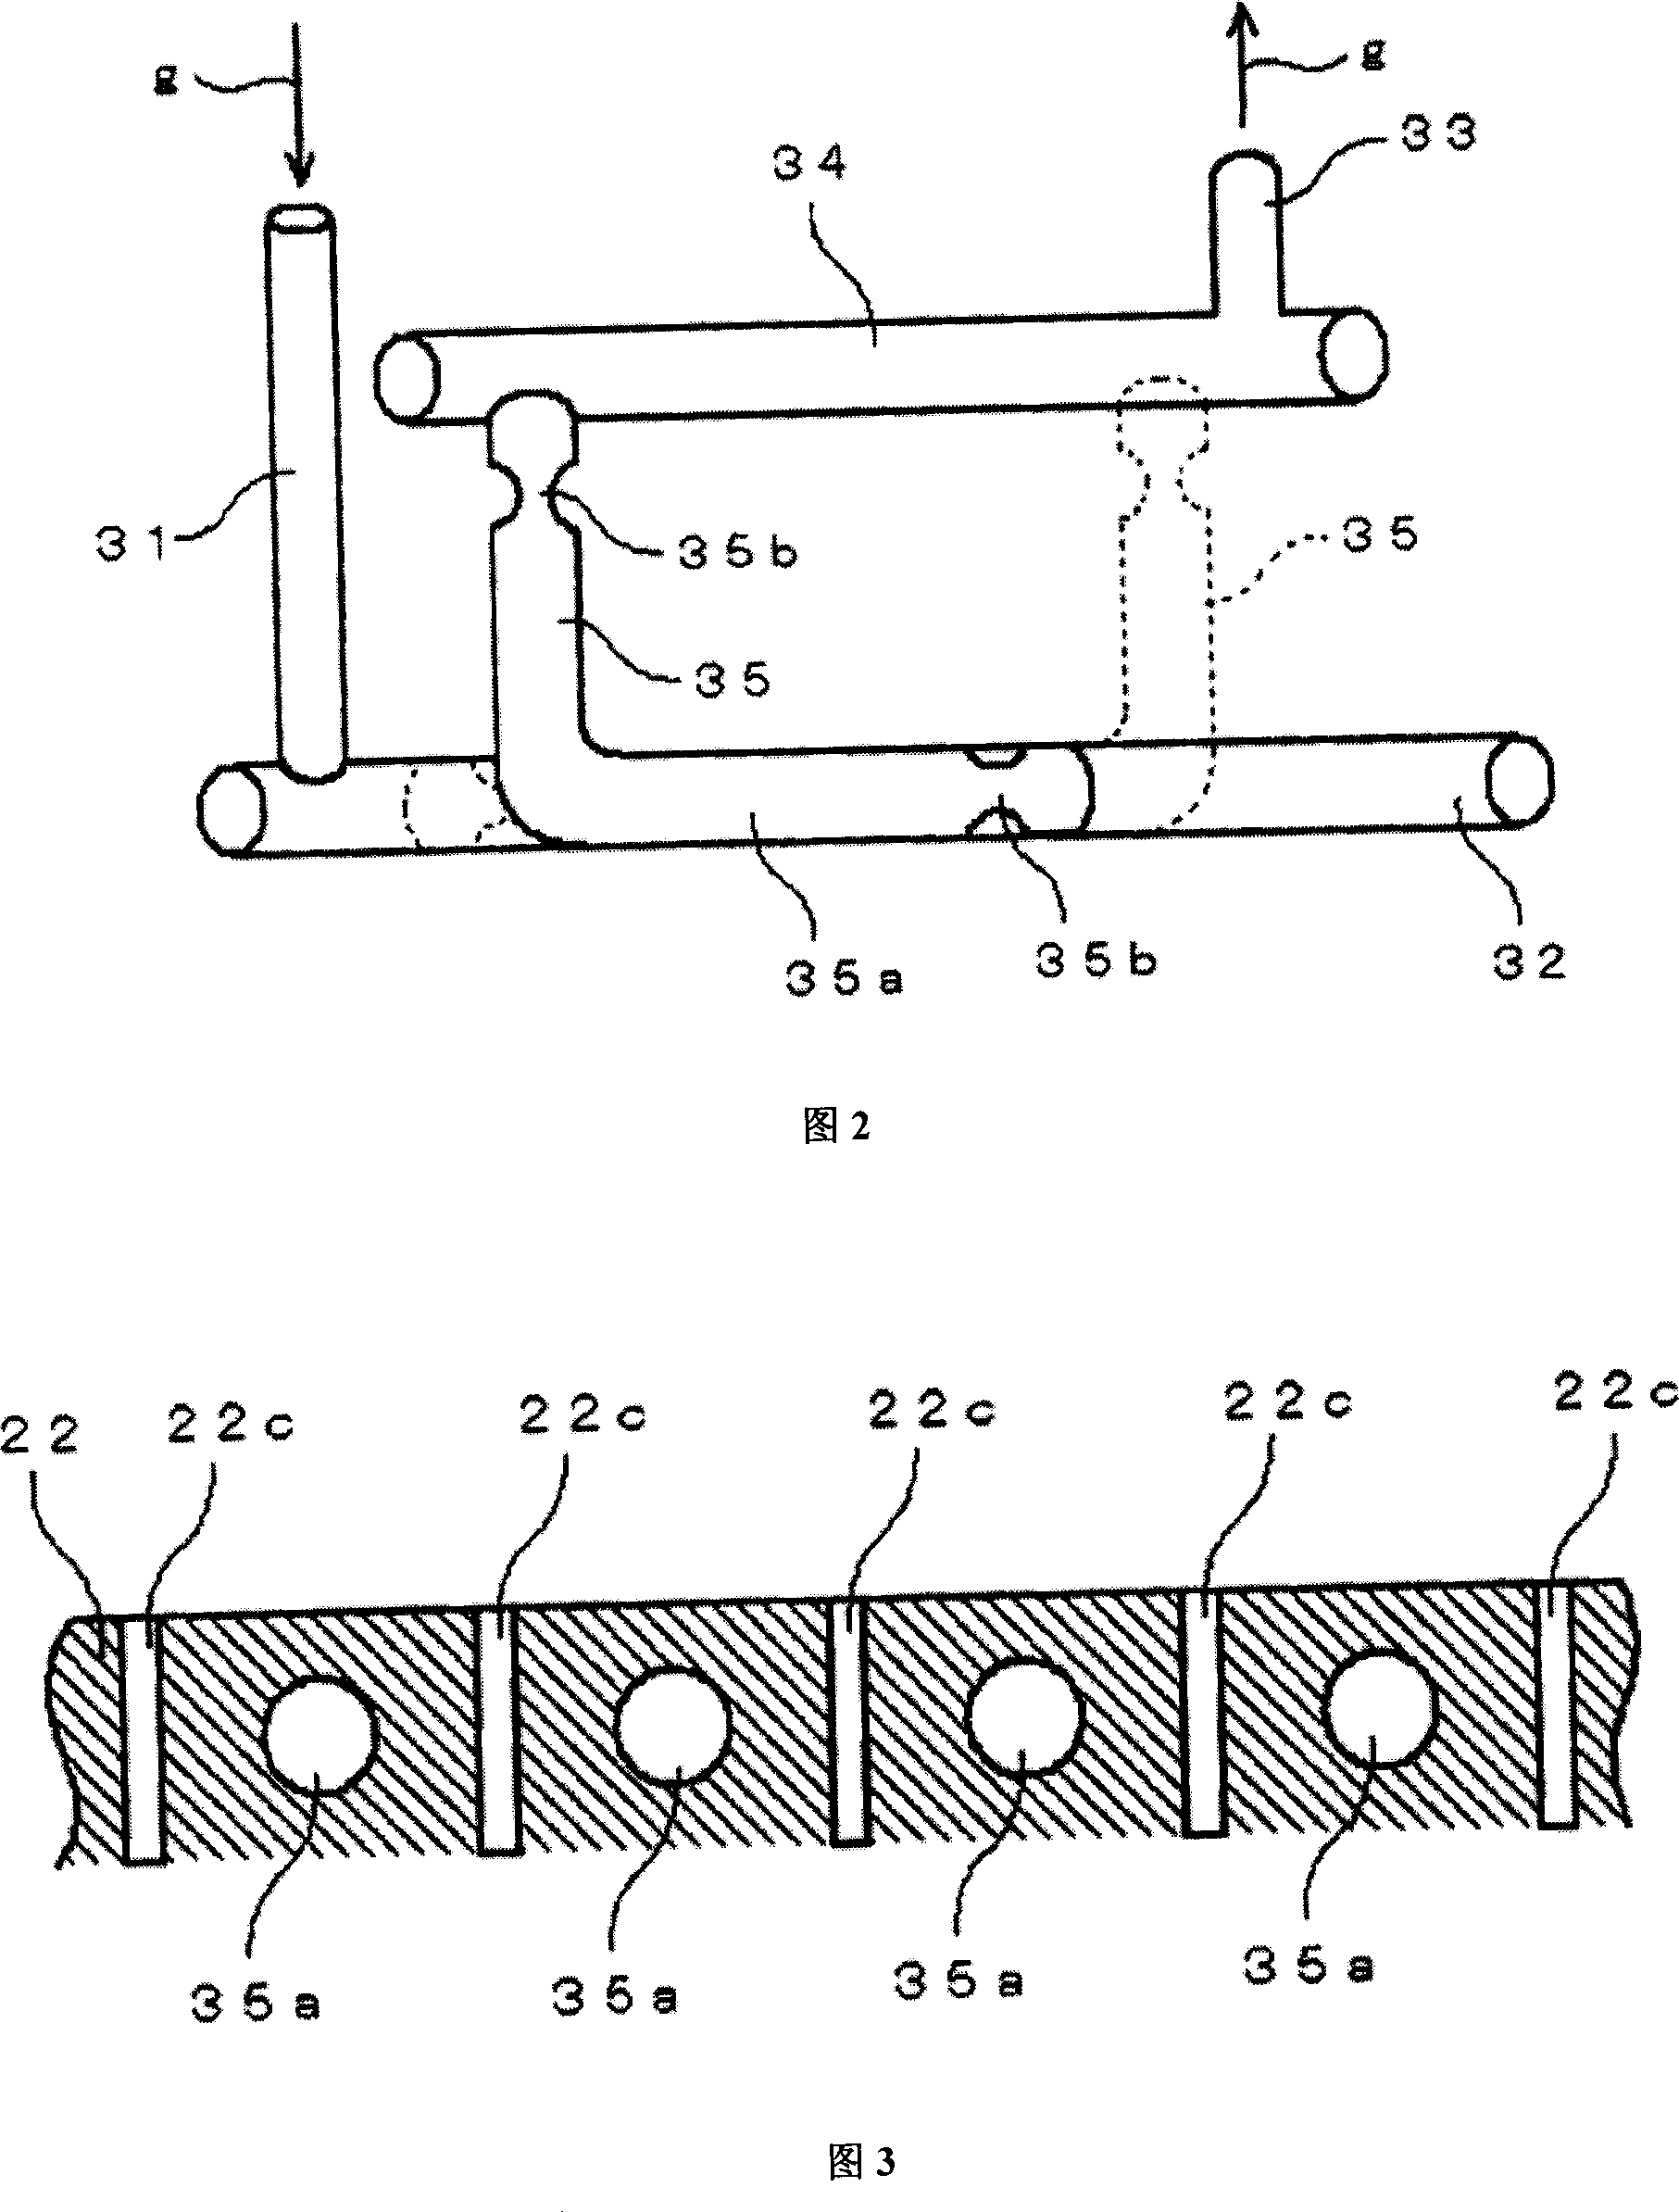 Substrate surface treating apparatus